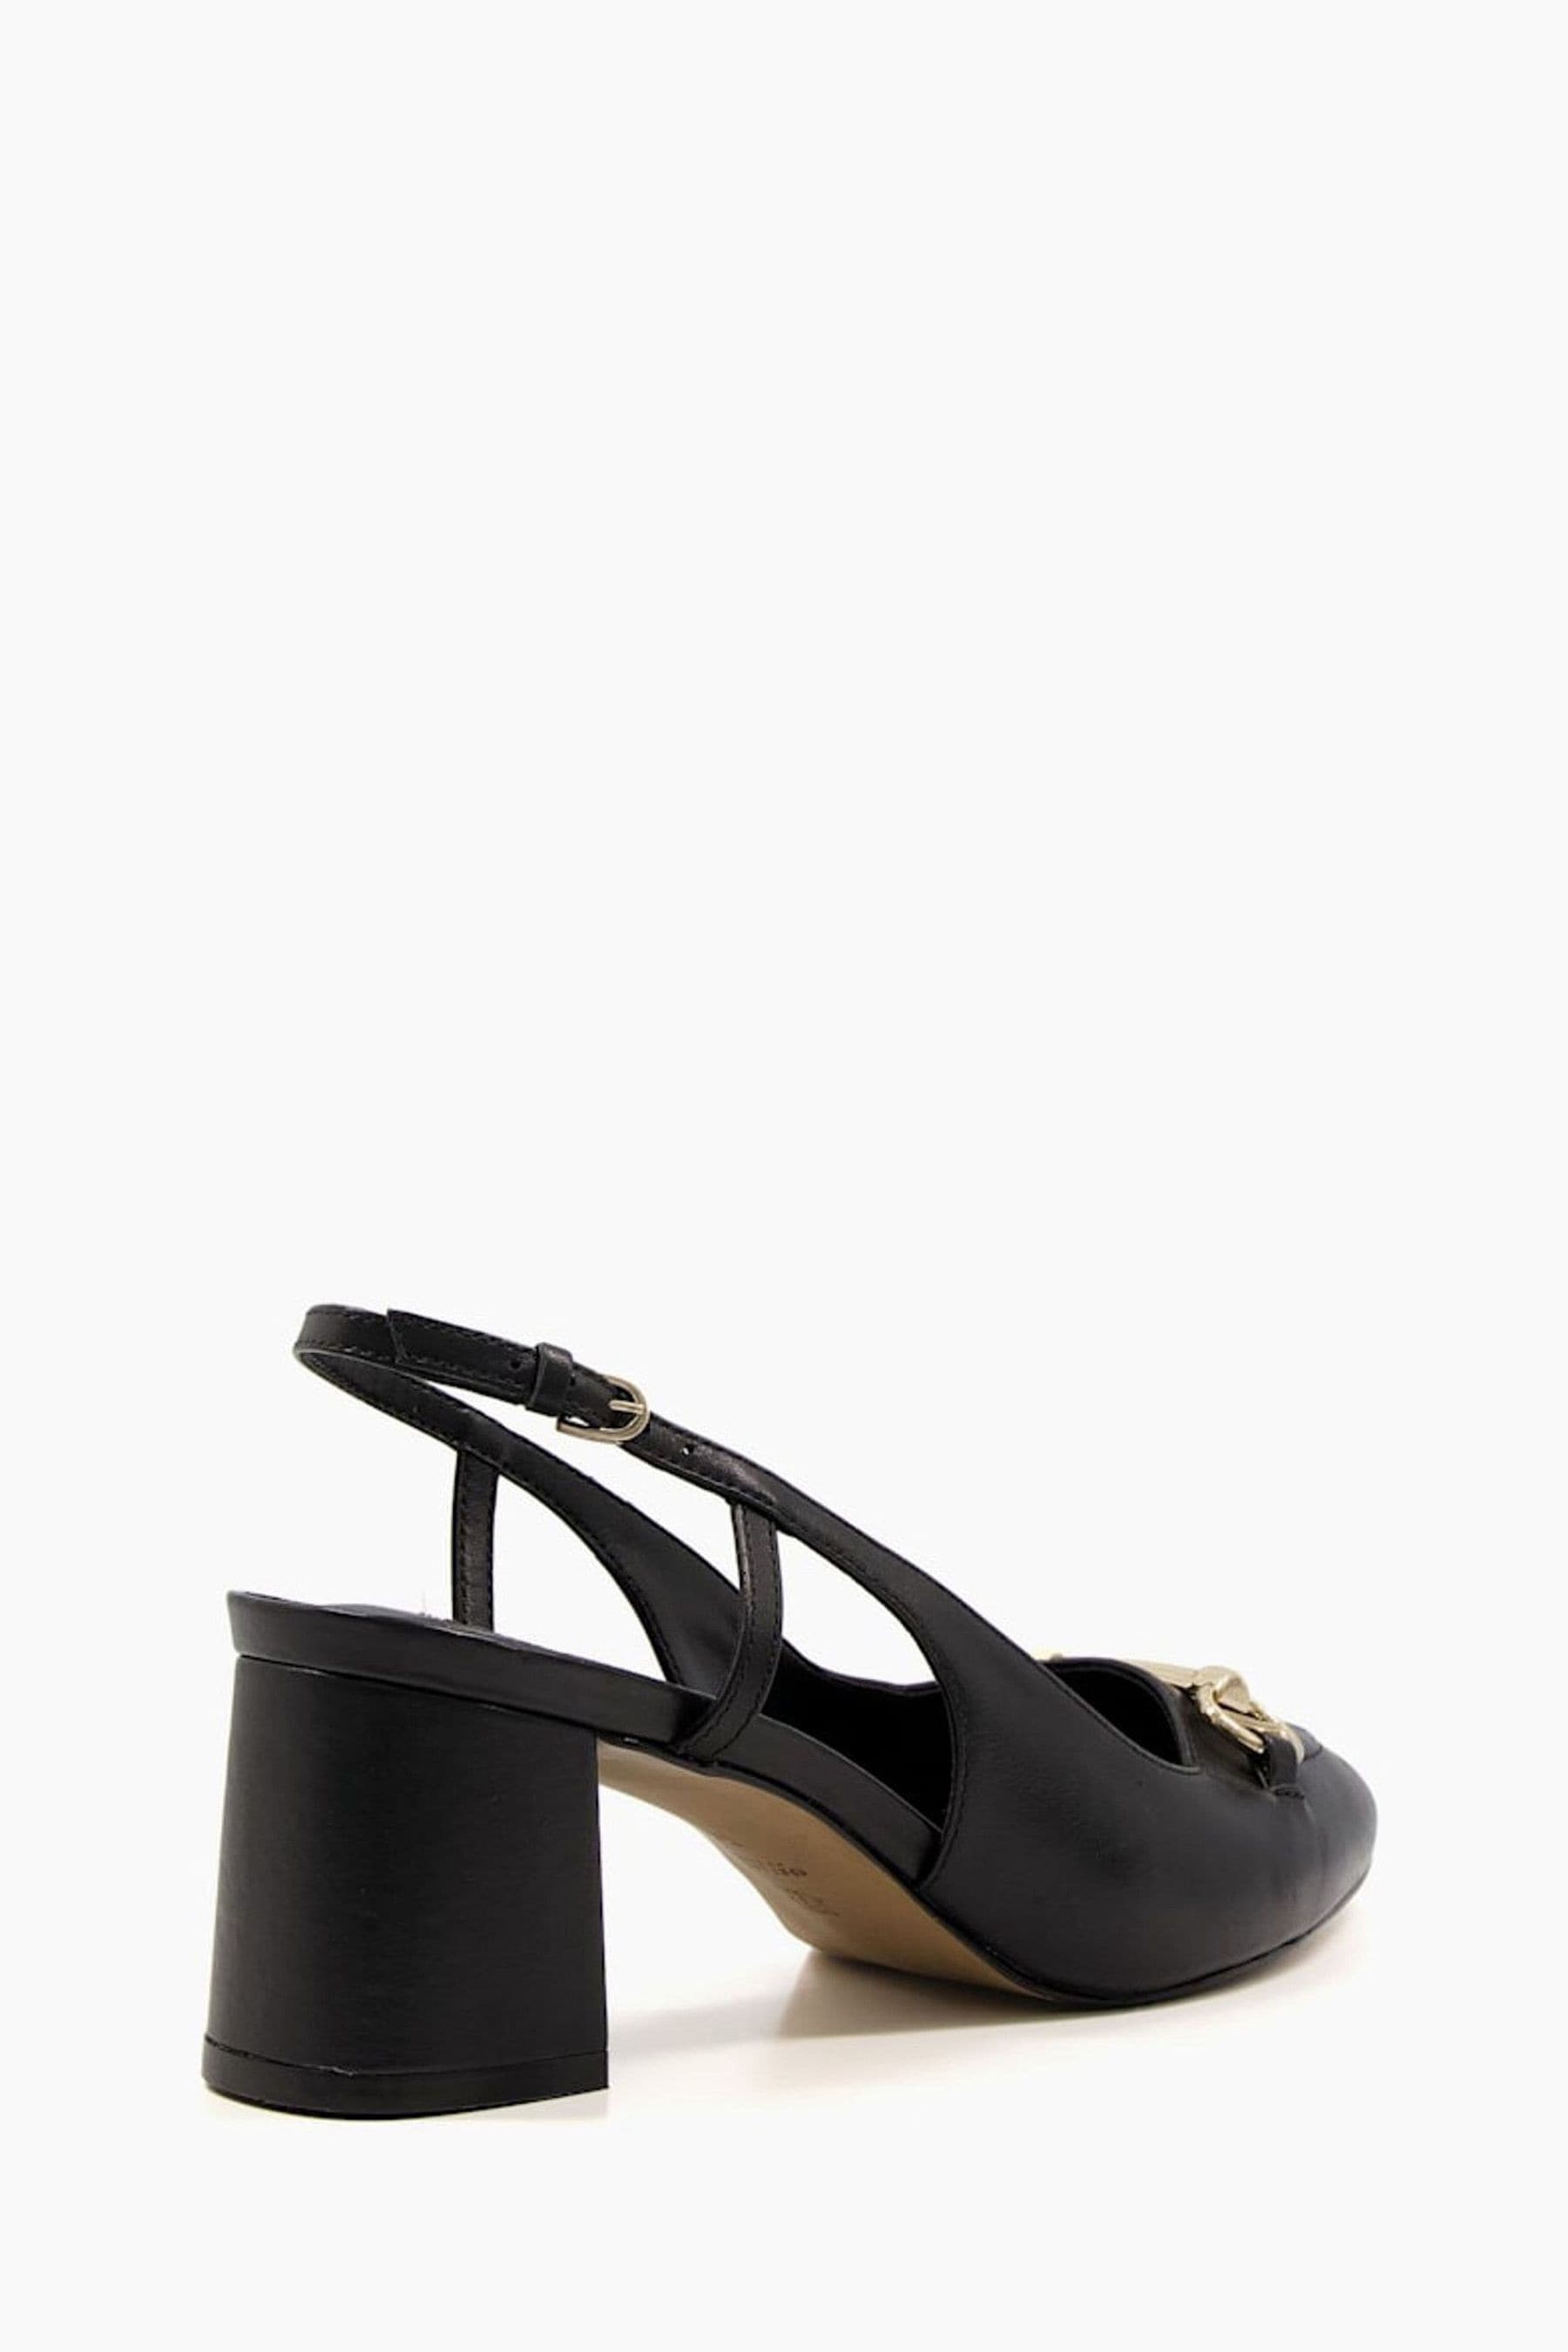 Buy Dune London Wide Fit Cassie Snaffle Open Court Sandals from the ...